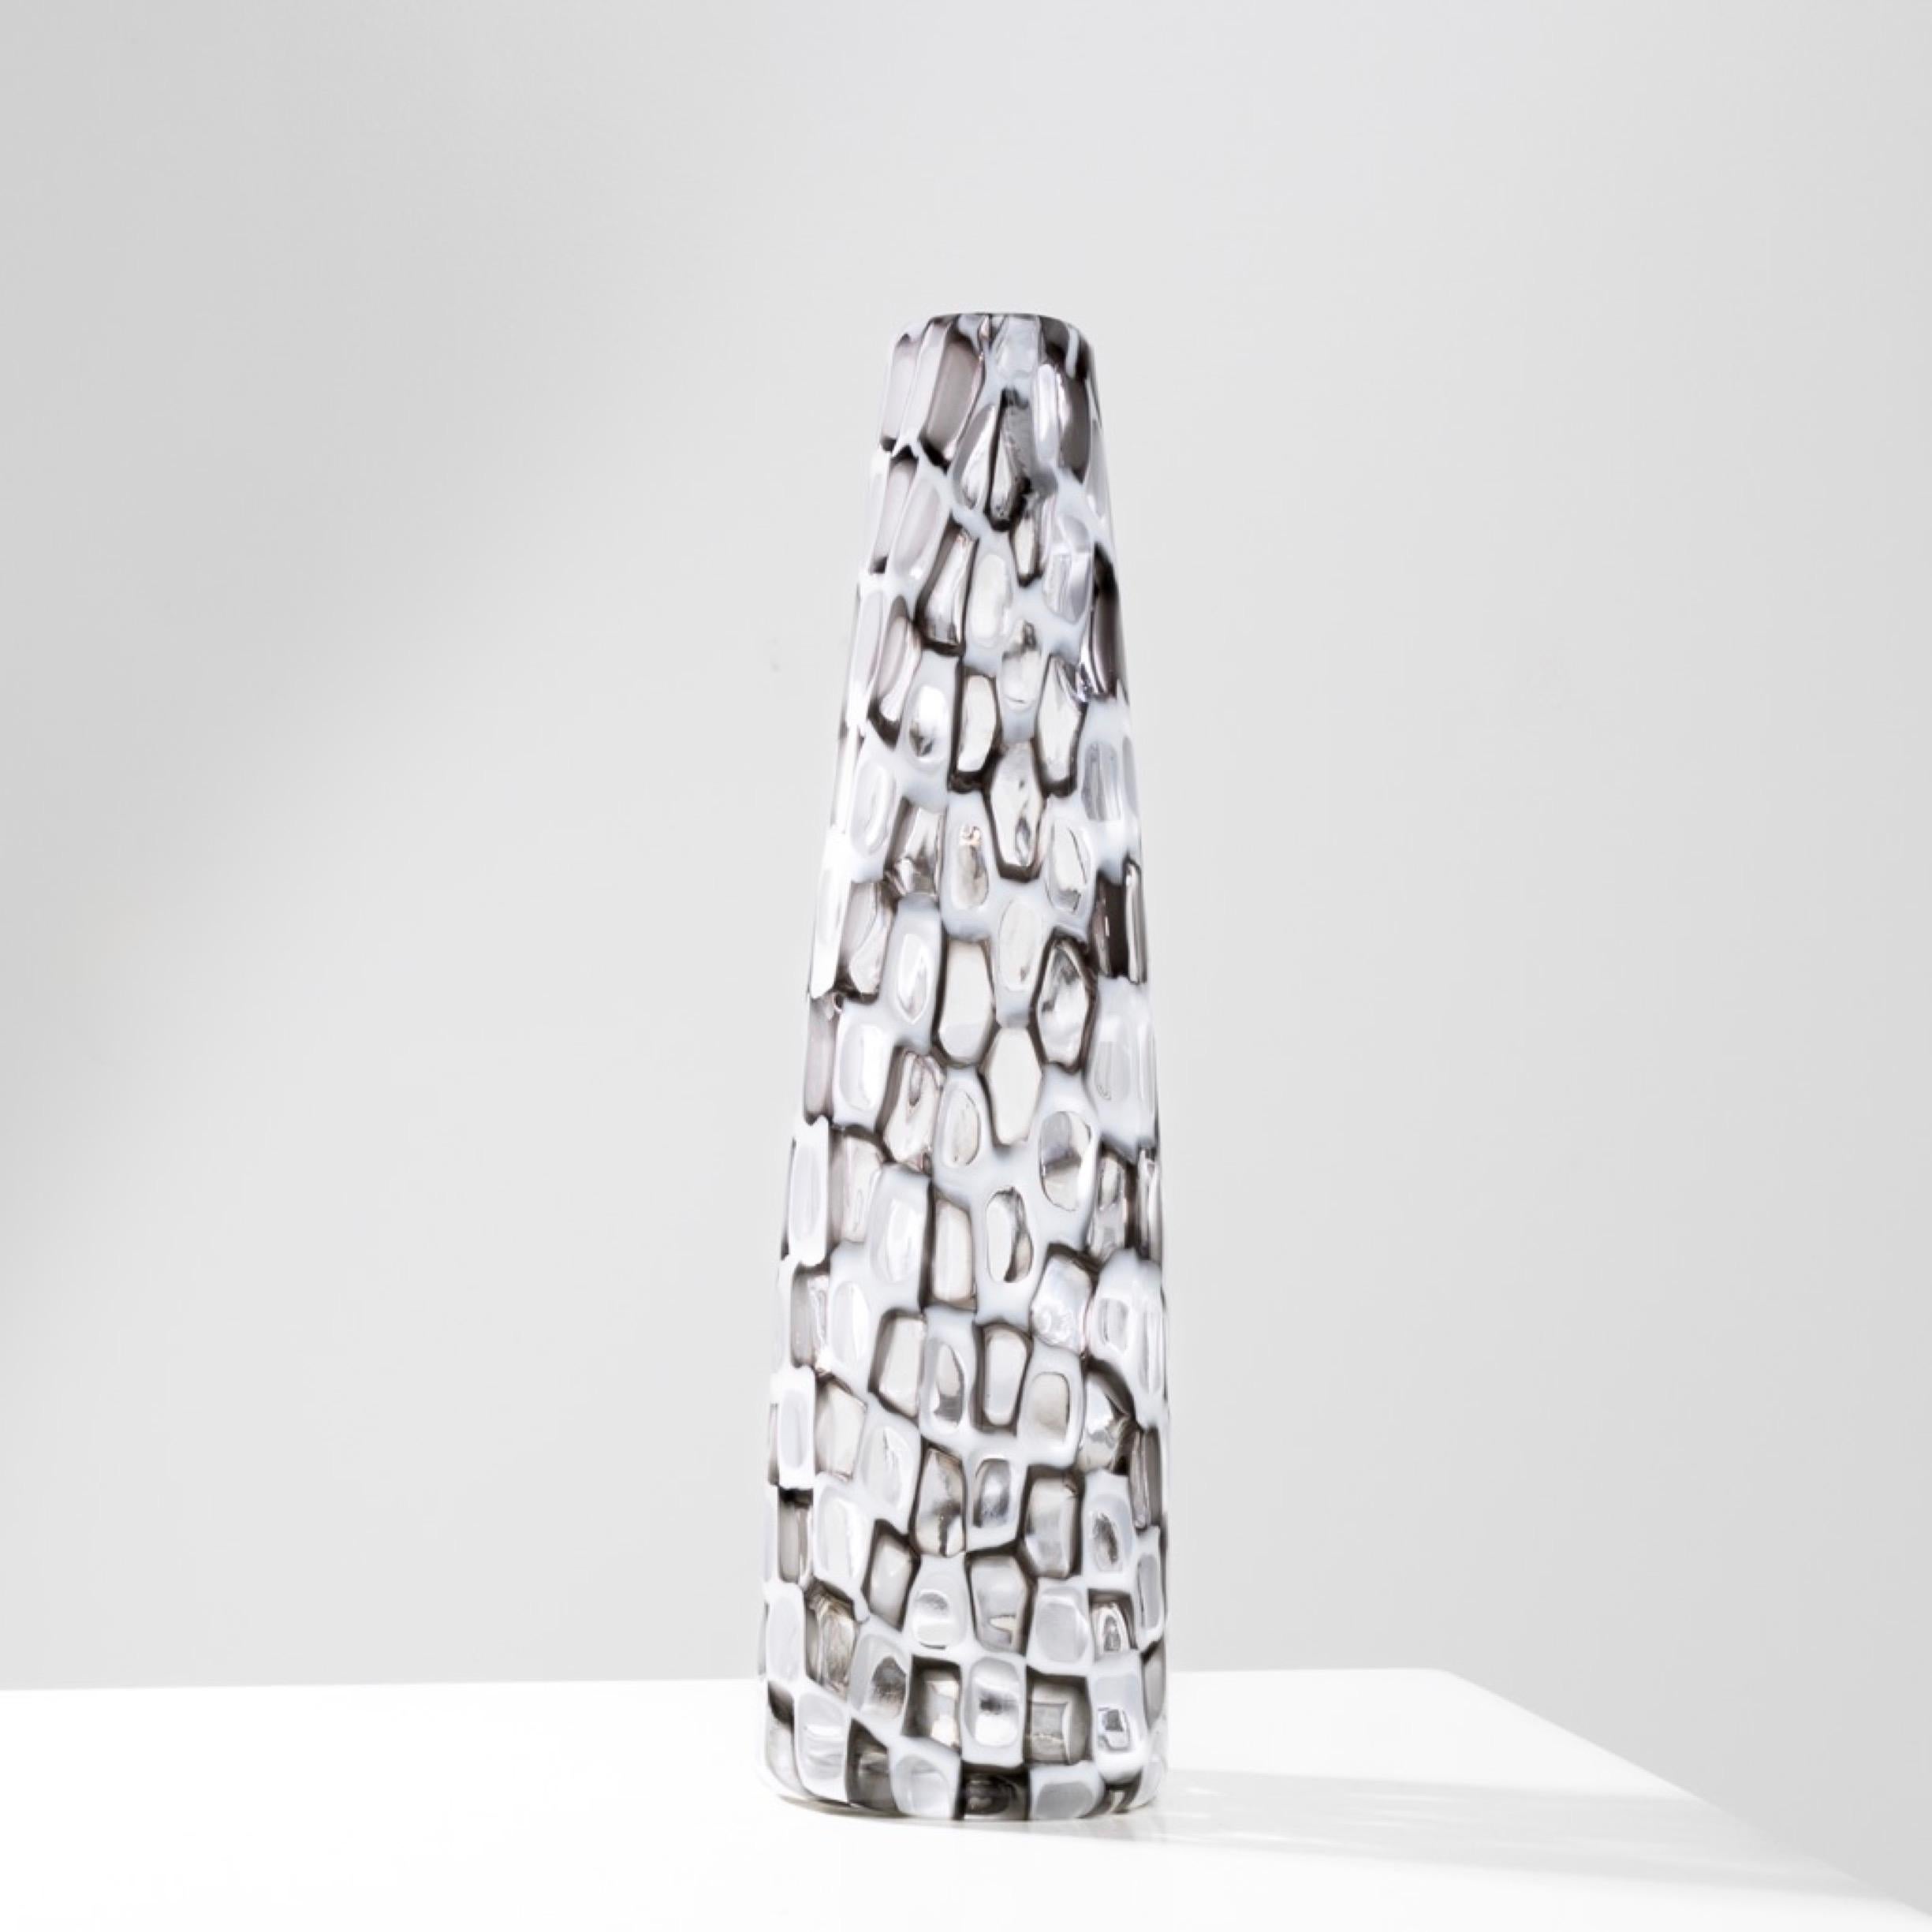 Occhi by Tobia Scarpa – Quadrangular shaped vase
“Occhi” vase by Tobia Scarpa.
Quadrangular shaped vase from the occhi series.
Made up of an arrangement of white and clear glass murrines and black and clear glass murrines.